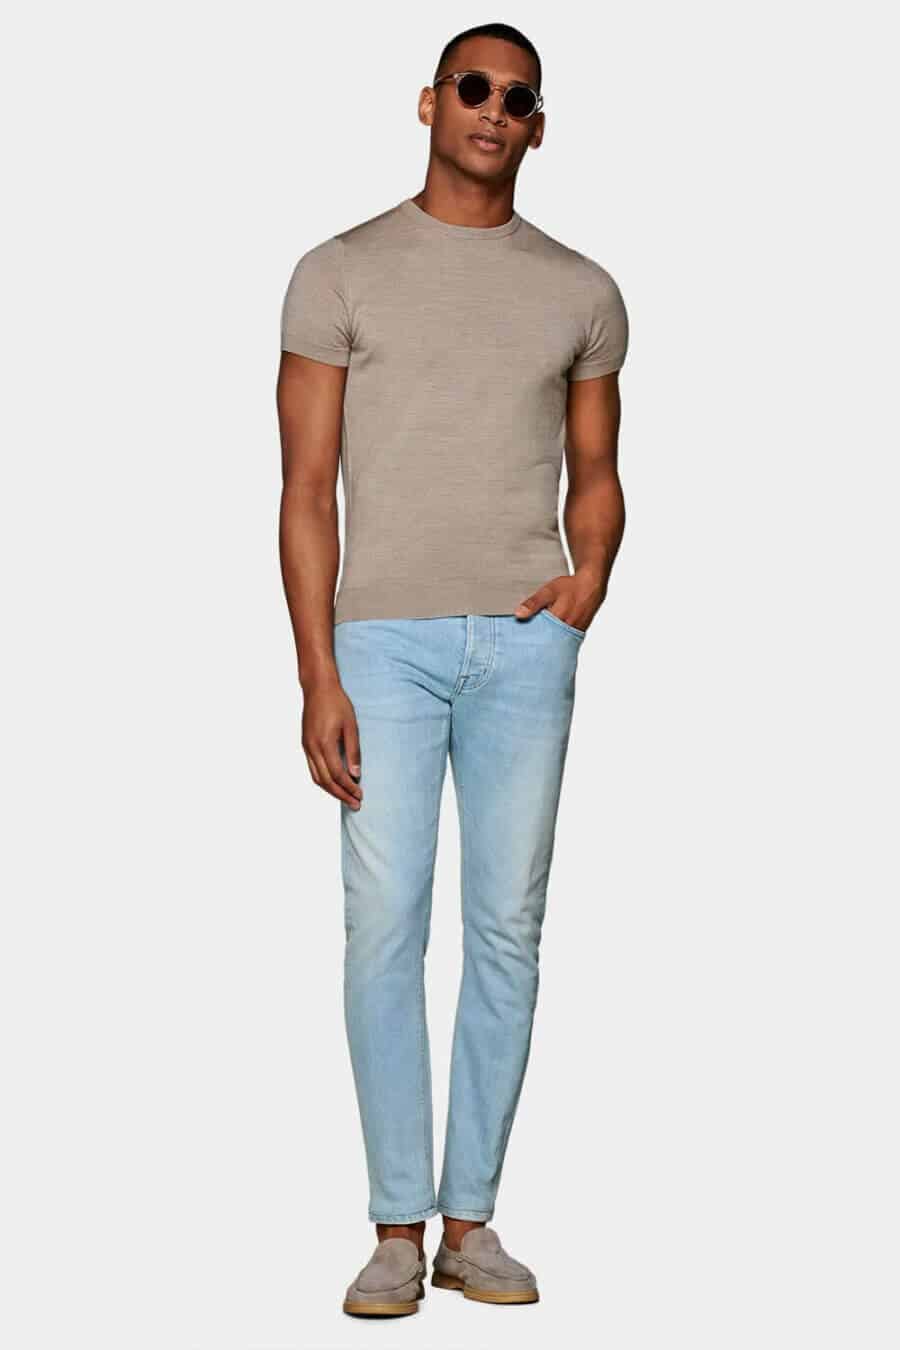 Men's t-shirt and pale jeans summer outfit